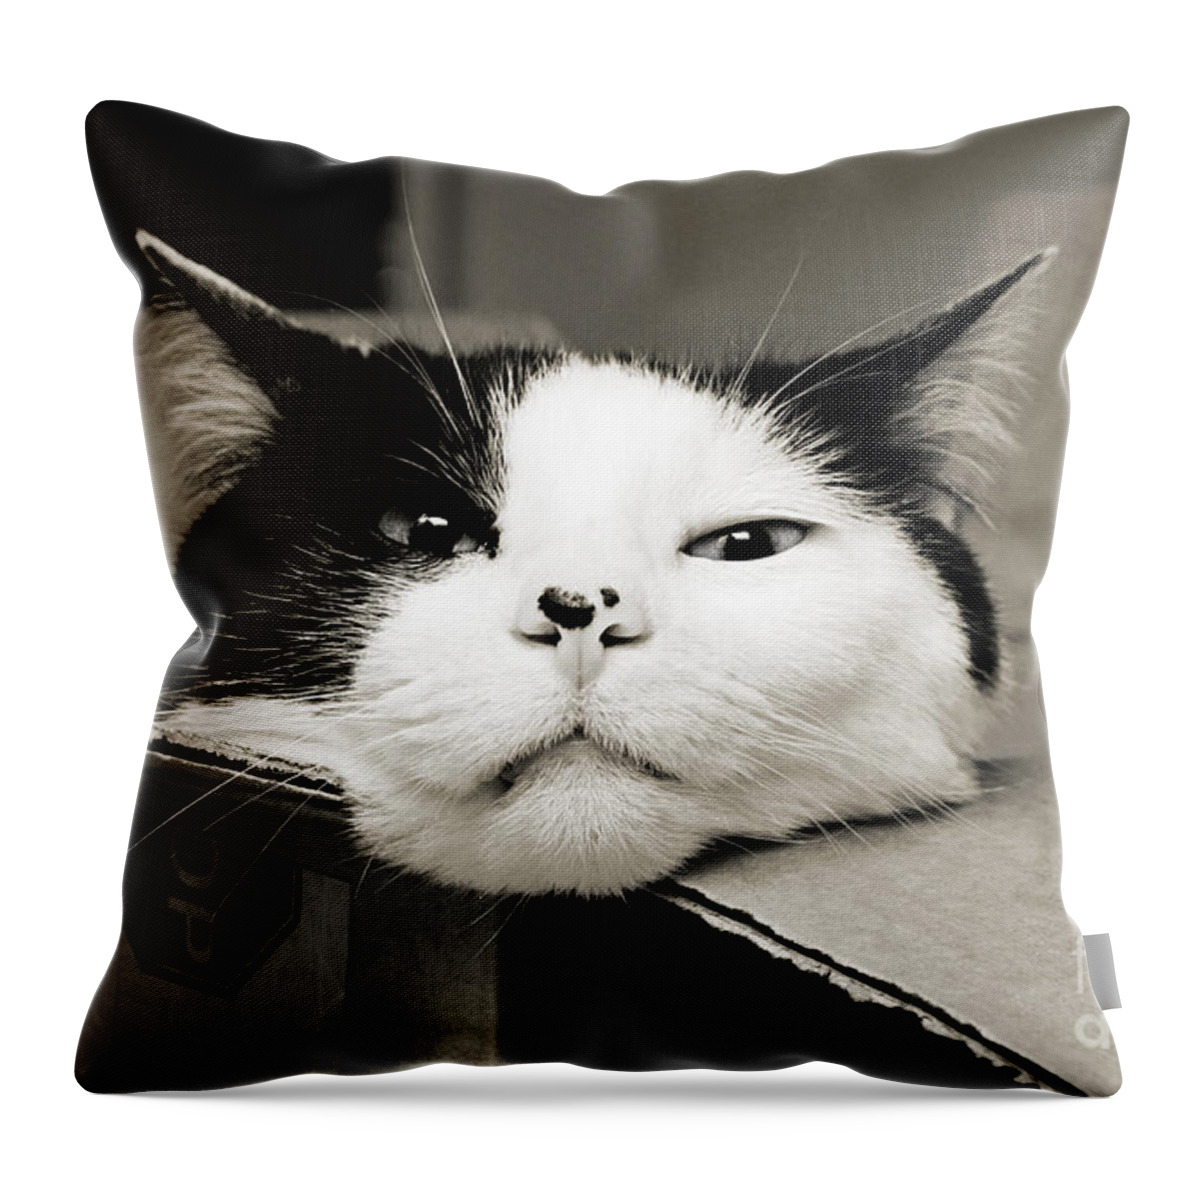 Andee Design Cat Throw Pillow featuring the photograph Special Delivery It's Pepper The Cat by Andee Design